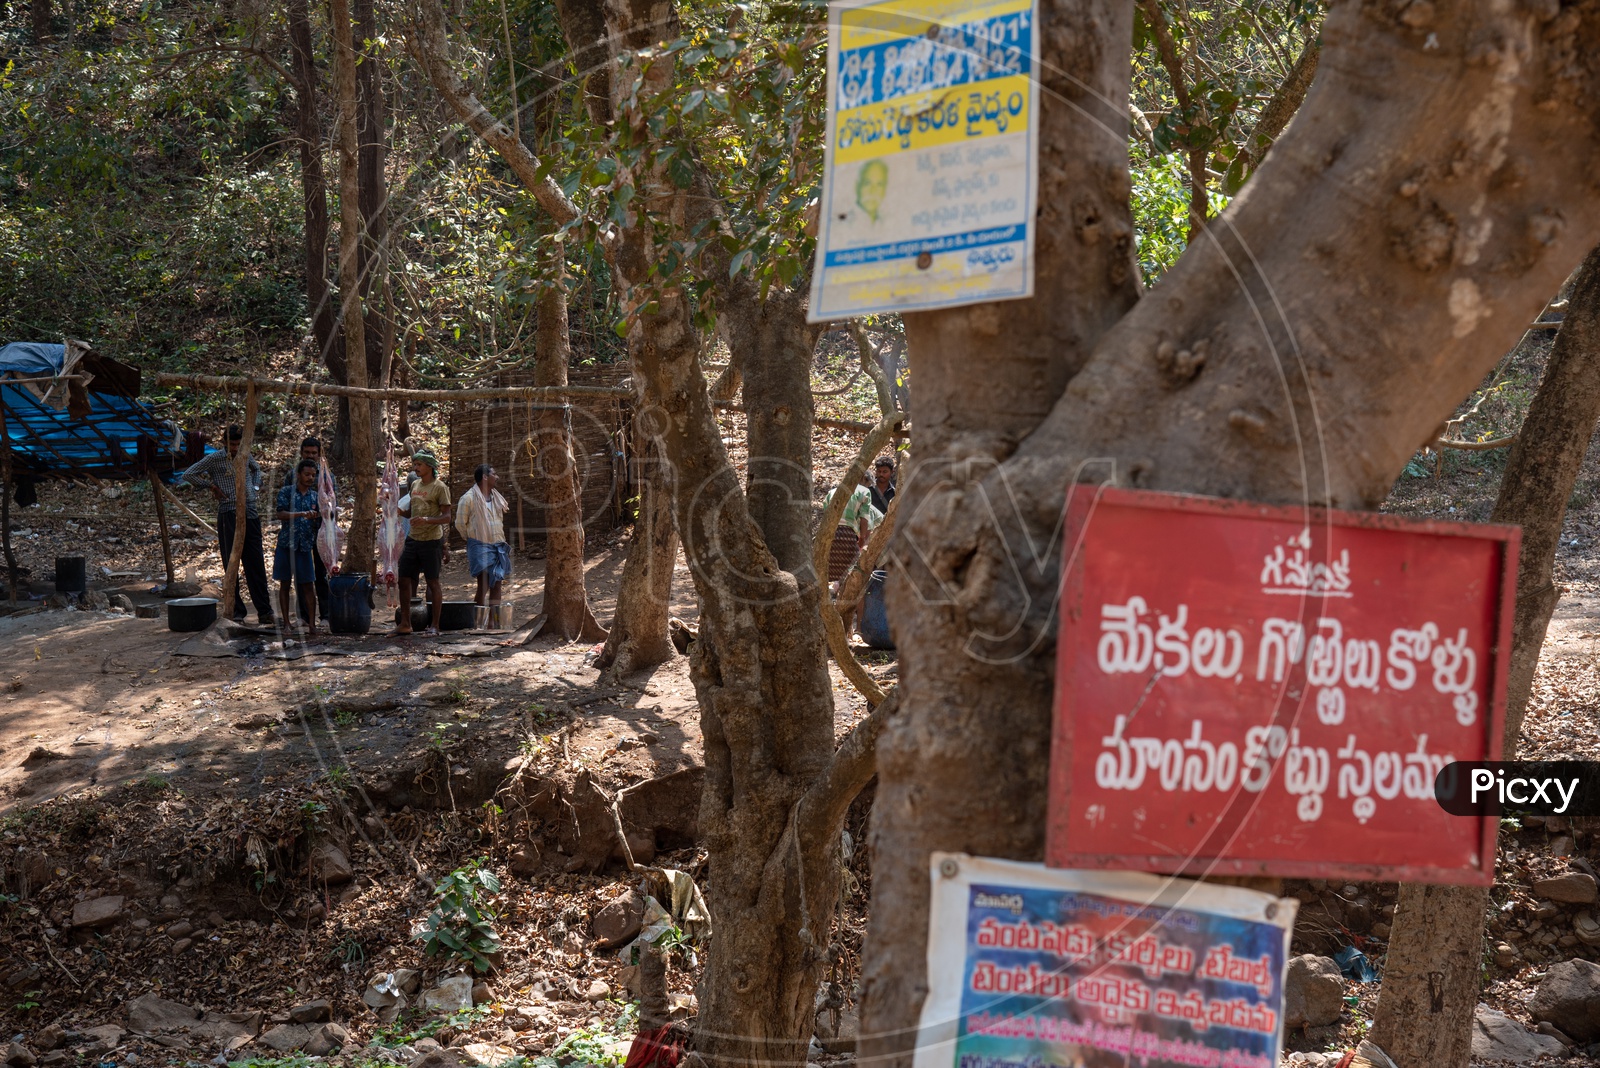 Place for offering goats and hens at Gubbala Mangamma Thalli Temple